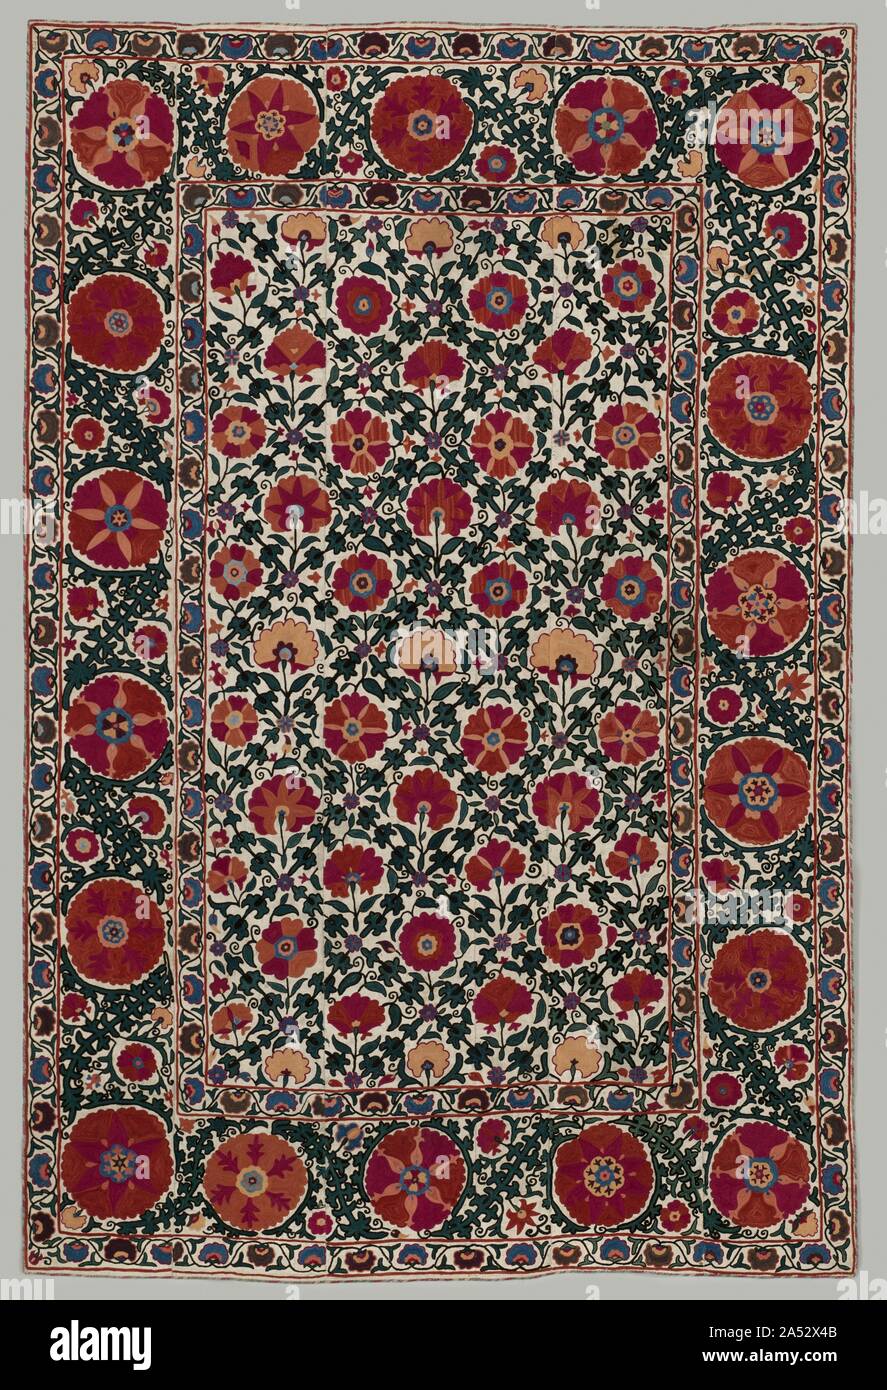 Wall Hanging, 1850-1899. Embroideries known as suzani, after the Persian and Tajik word for needle (suzan), feature bold floral and foliate motifs enriched with several shades of red and crimson silk thread. This example suggests a lush garden enriched with single flowering plants alternating with a bird&#x2019;s-eye view of blossoms in a foliate diamond trellis. Either a skilled family member or a professional drew the pattern in black ink (still visible) on five loosely joined cotton cloths; female family members disassembled them for stitching and reassembled them upon completion. Suzanis w Stock Photo